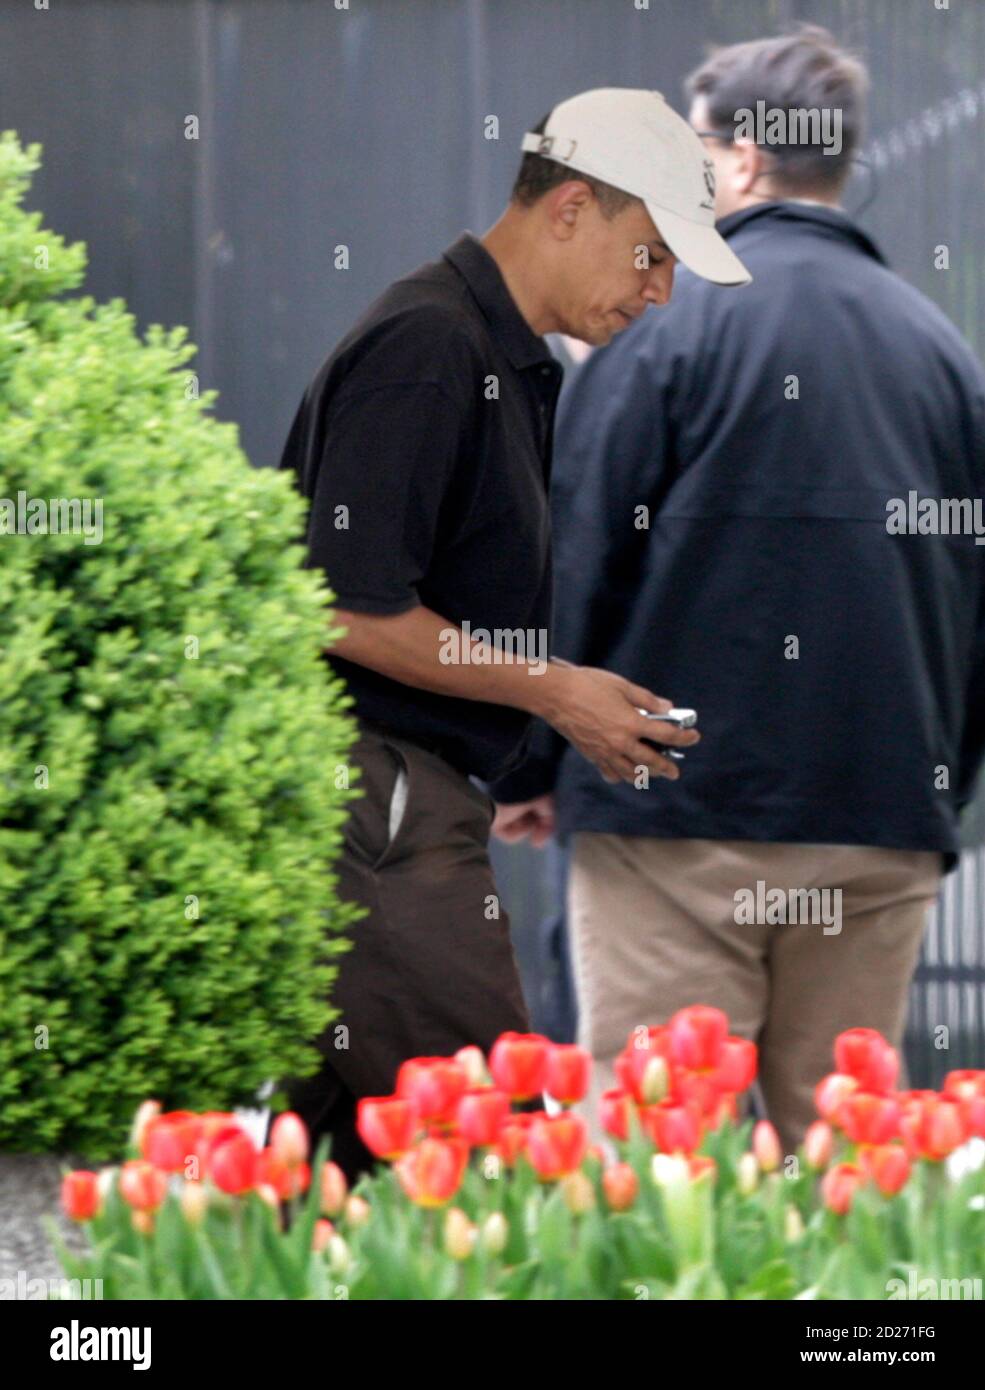 U.S. President Barack Obama returns to the White House in Washington after playing golf at Fort Belvoir, Virginia April 3, 2010. REUTERS/Yuri Gripas (UNITED STATES - Tags: POLITICS) BEST QUALITY AVAILABLE Stock Photo